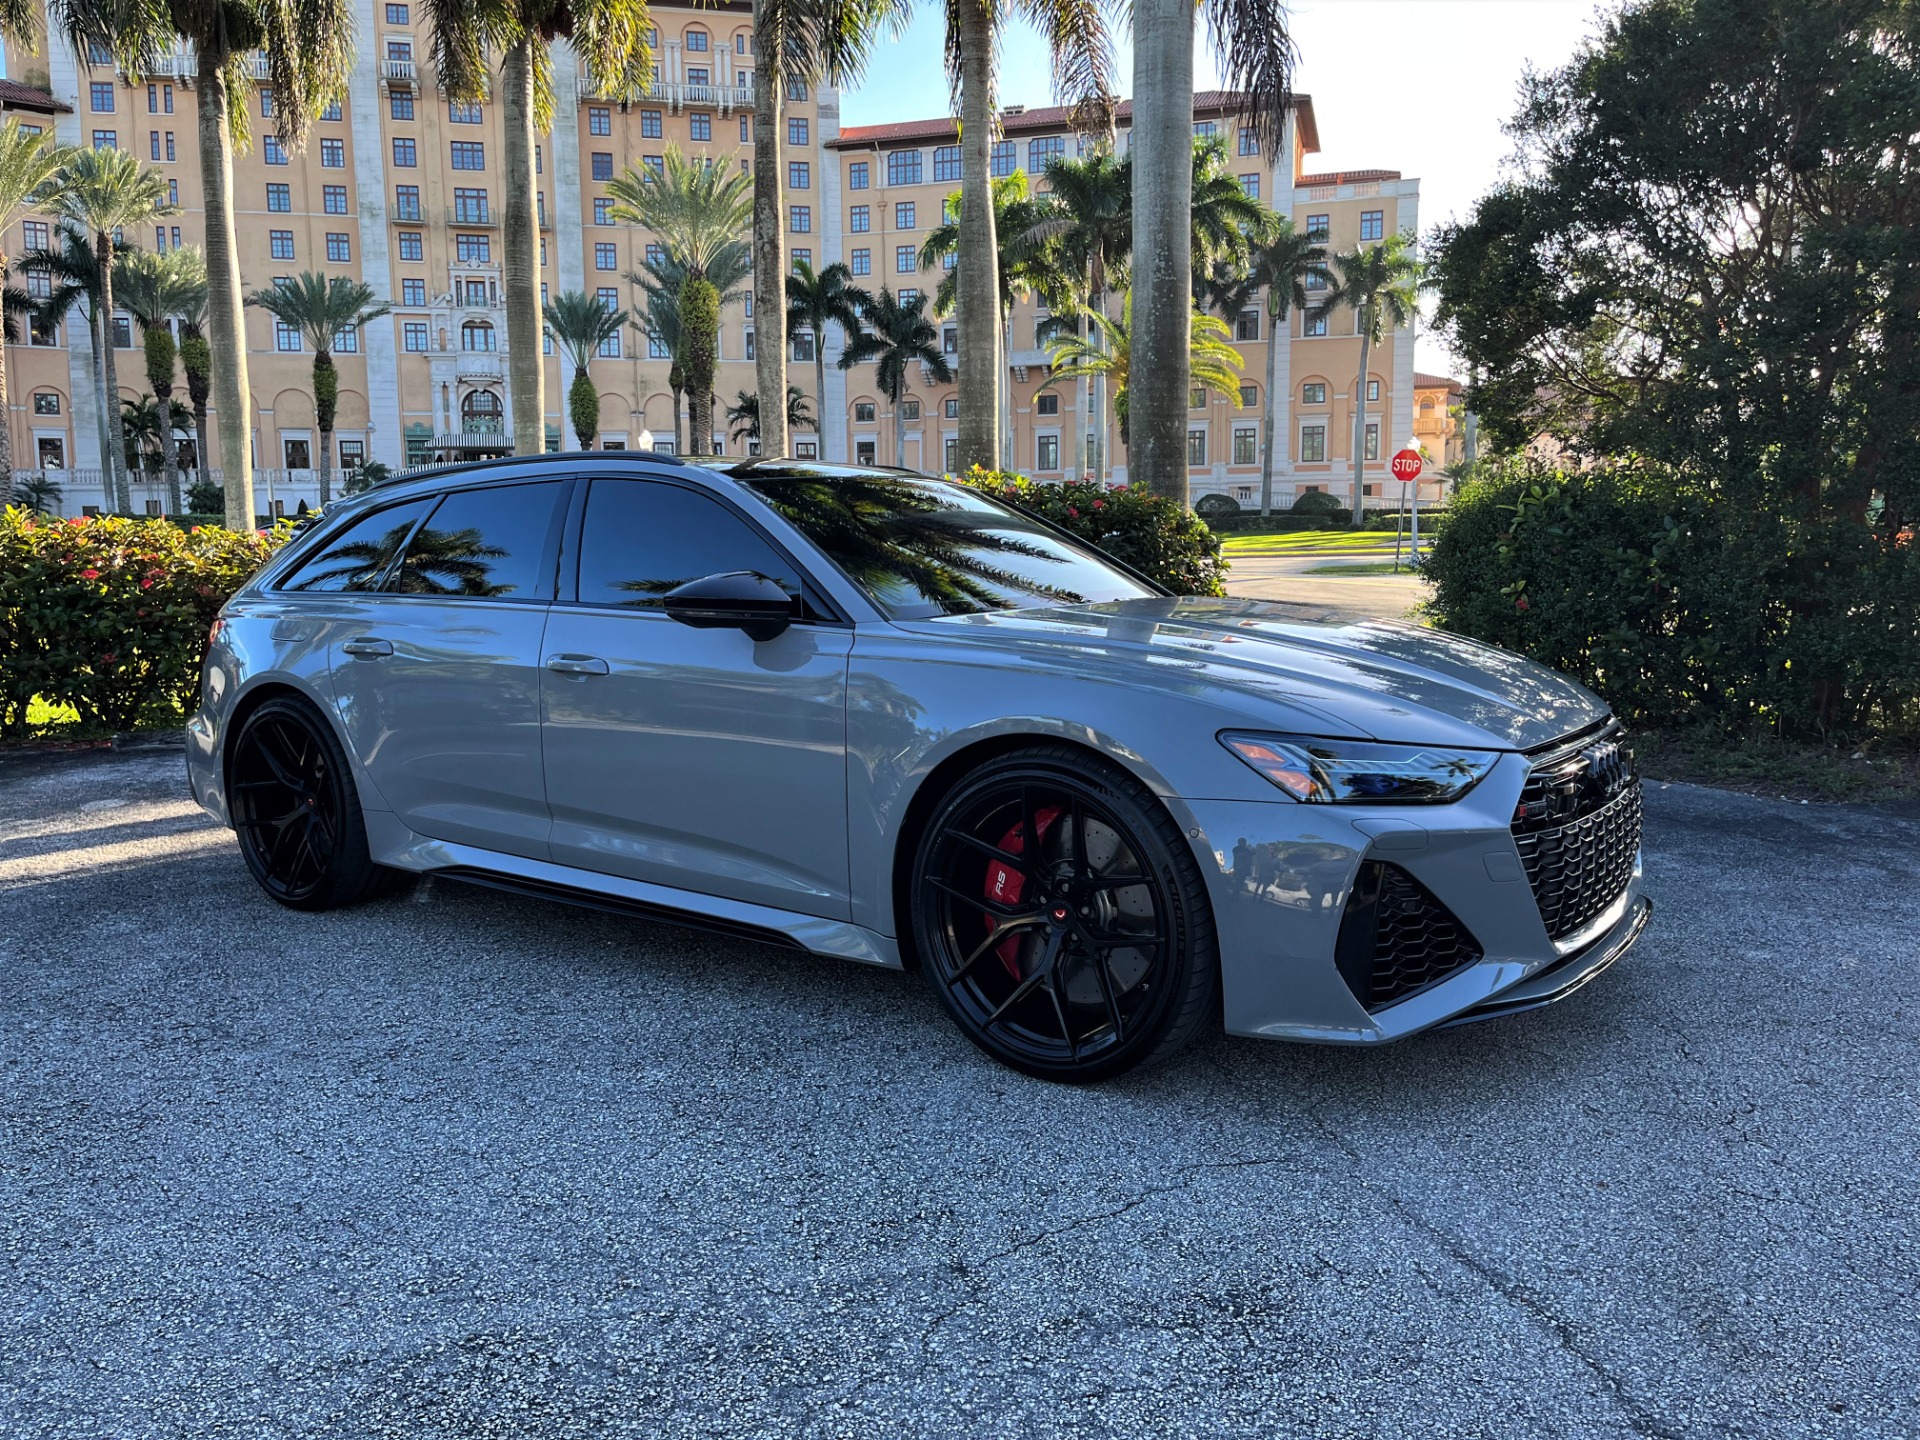 Used 2021 Audi RS 6 Avant 4.0T quattro Avant for sale $122,850 at The Gables Sports Cars in Miami FL 33146 2